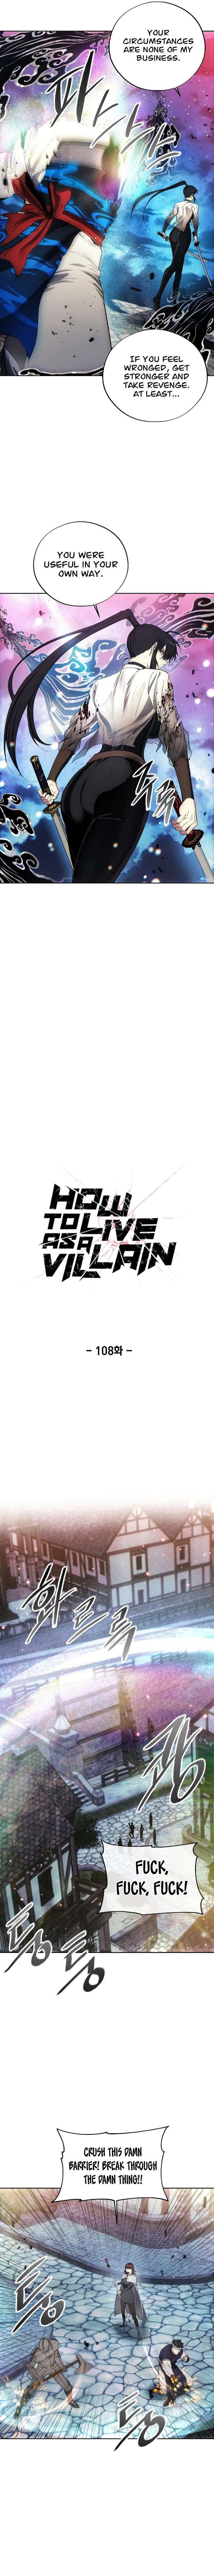 How To Live As A Villain 108 5